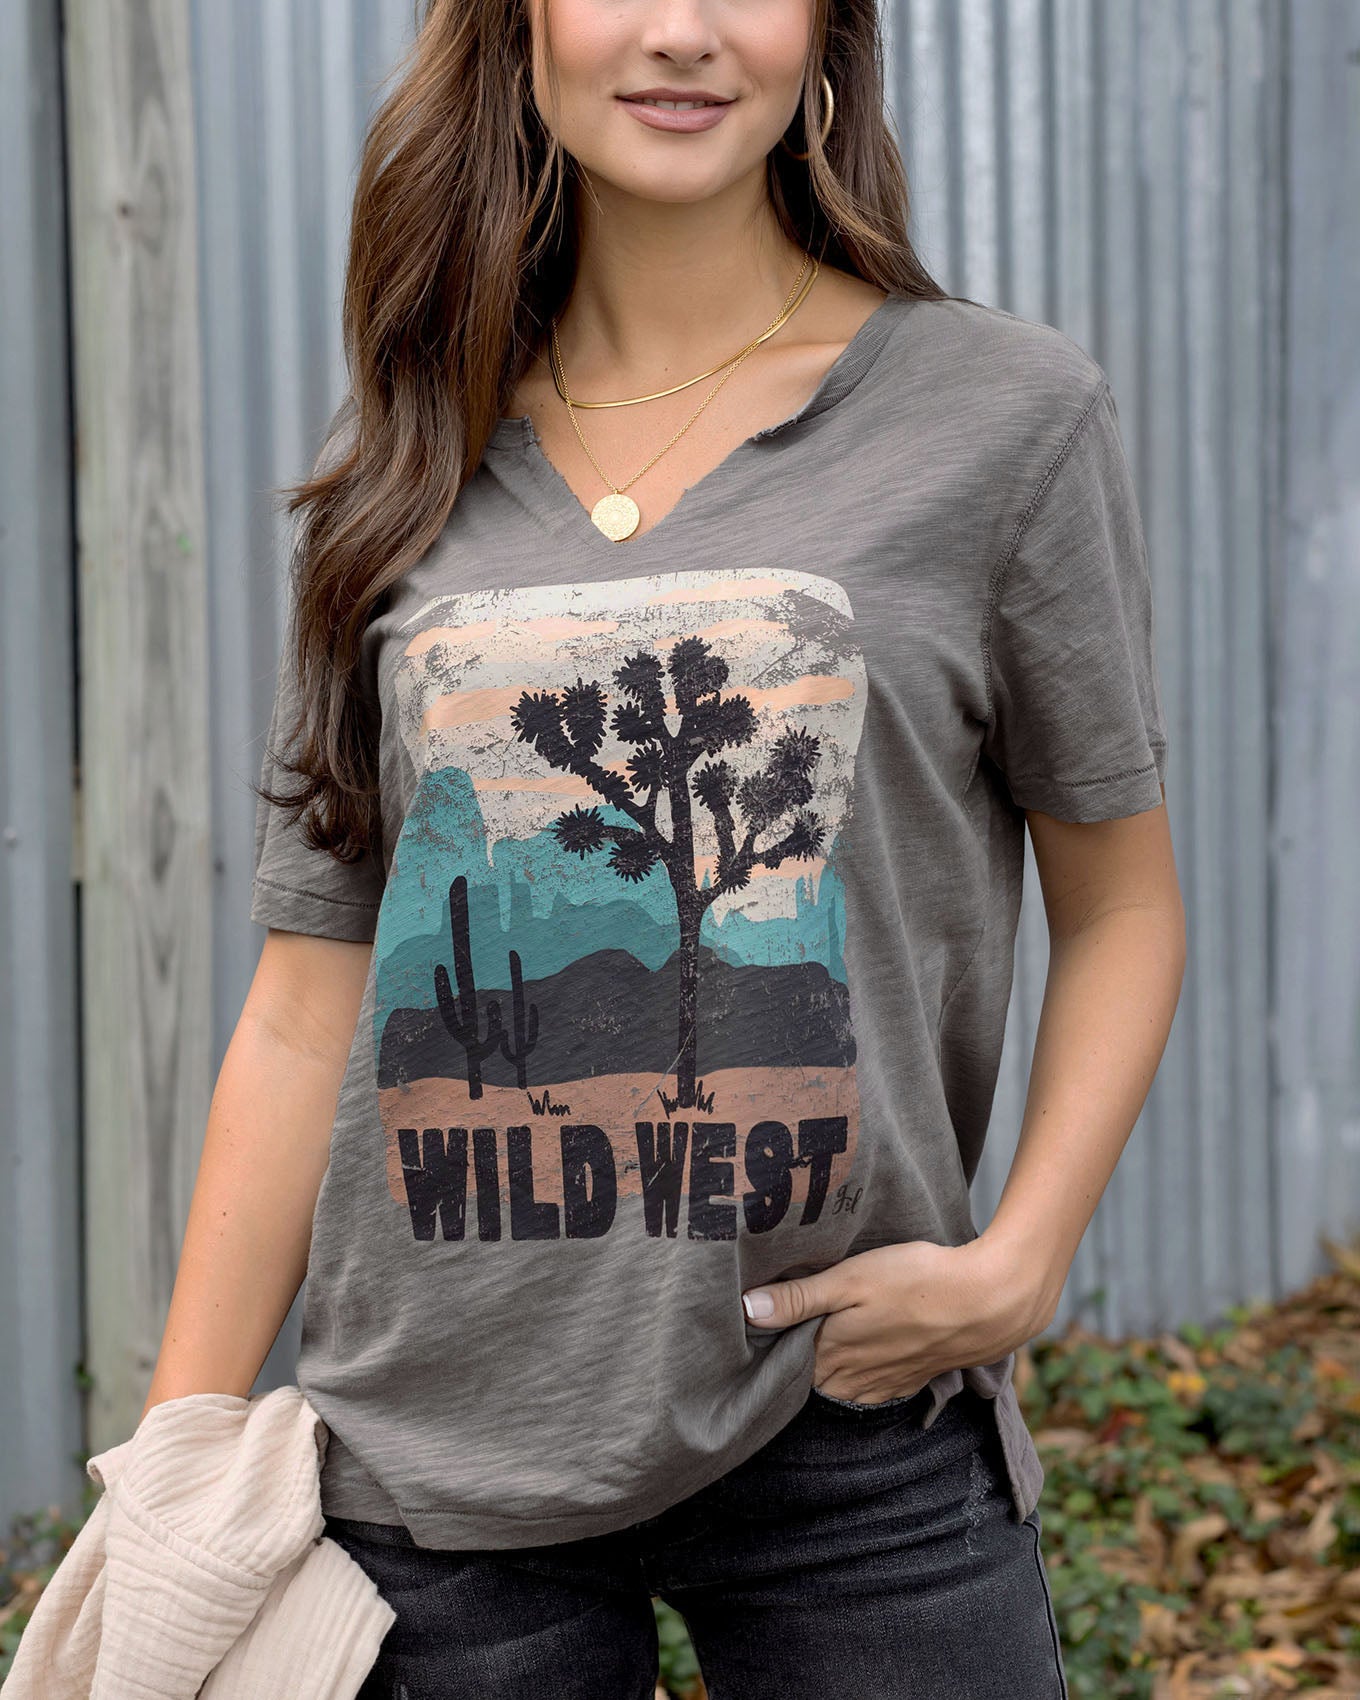 Womens V Neck T Shirts Lace Up Sweet Heart Print,clearence in